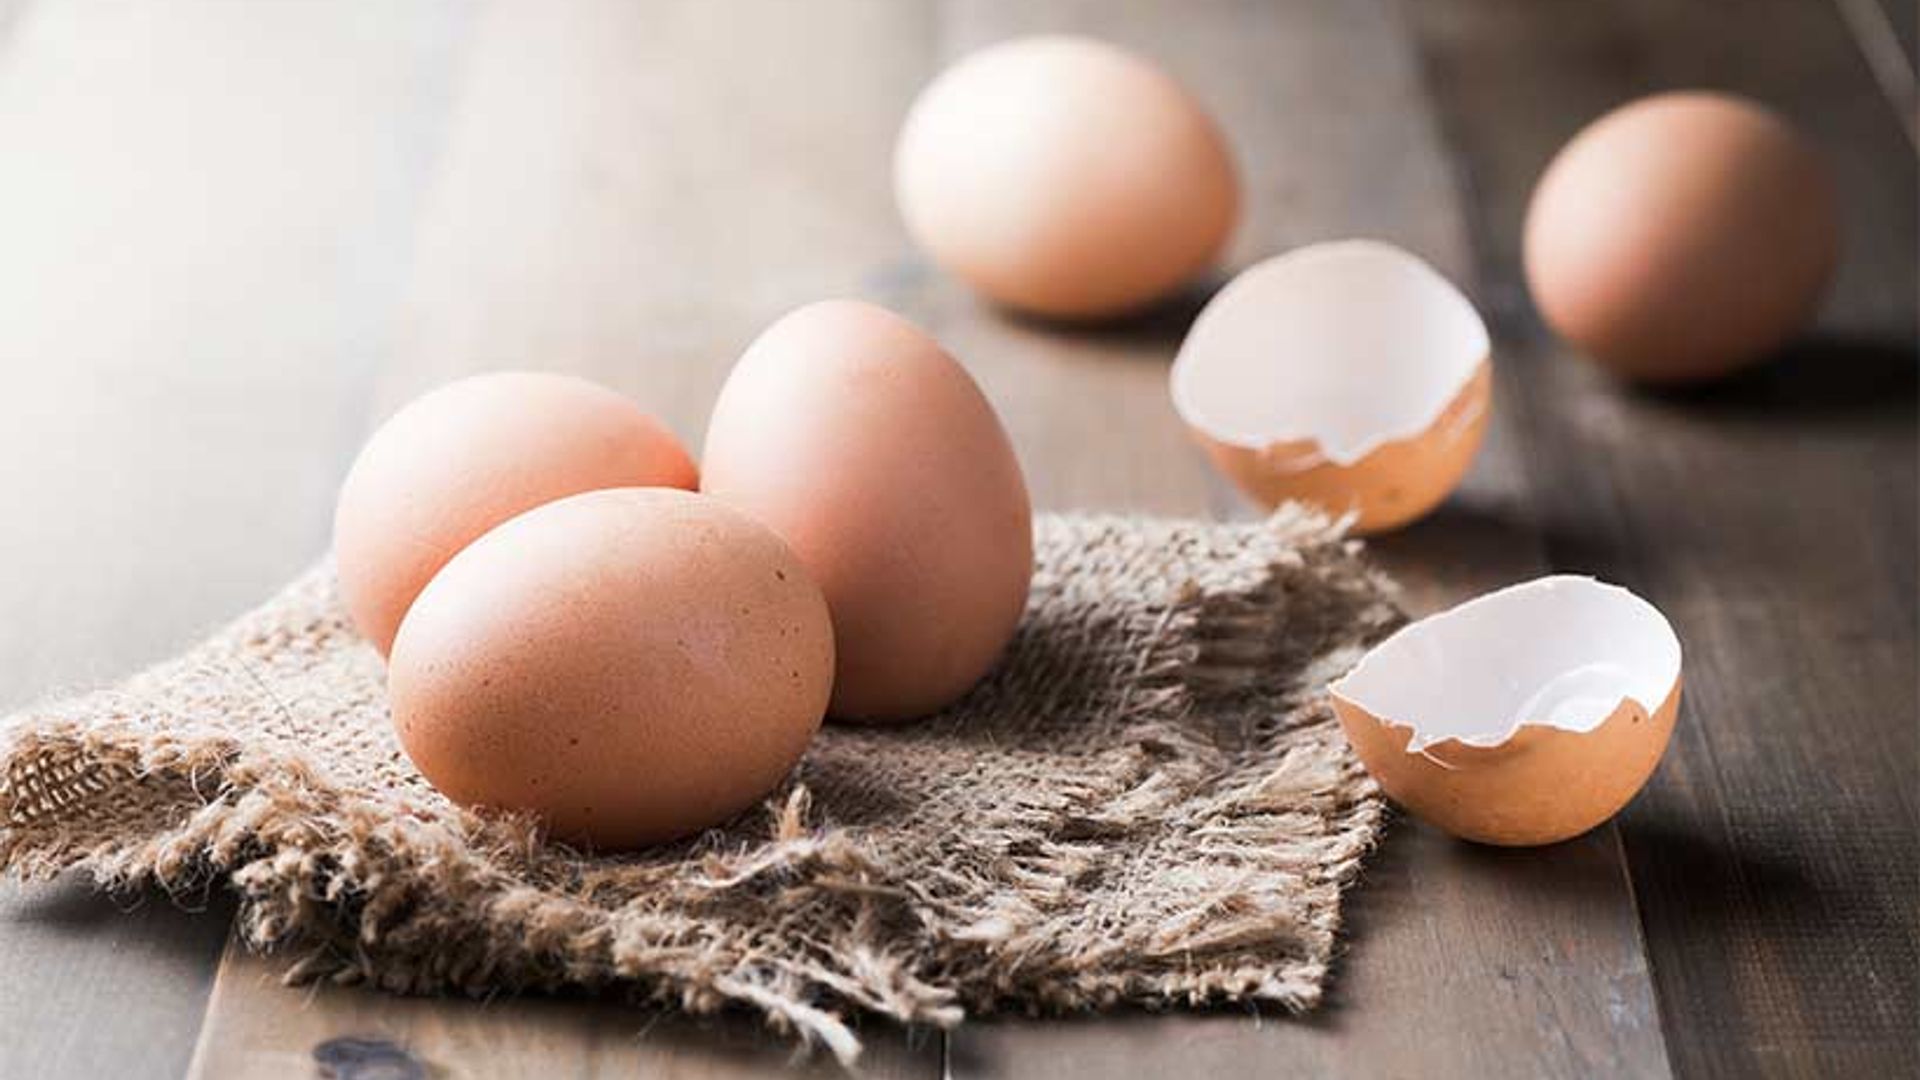 Video: How to crack an egg like a pro